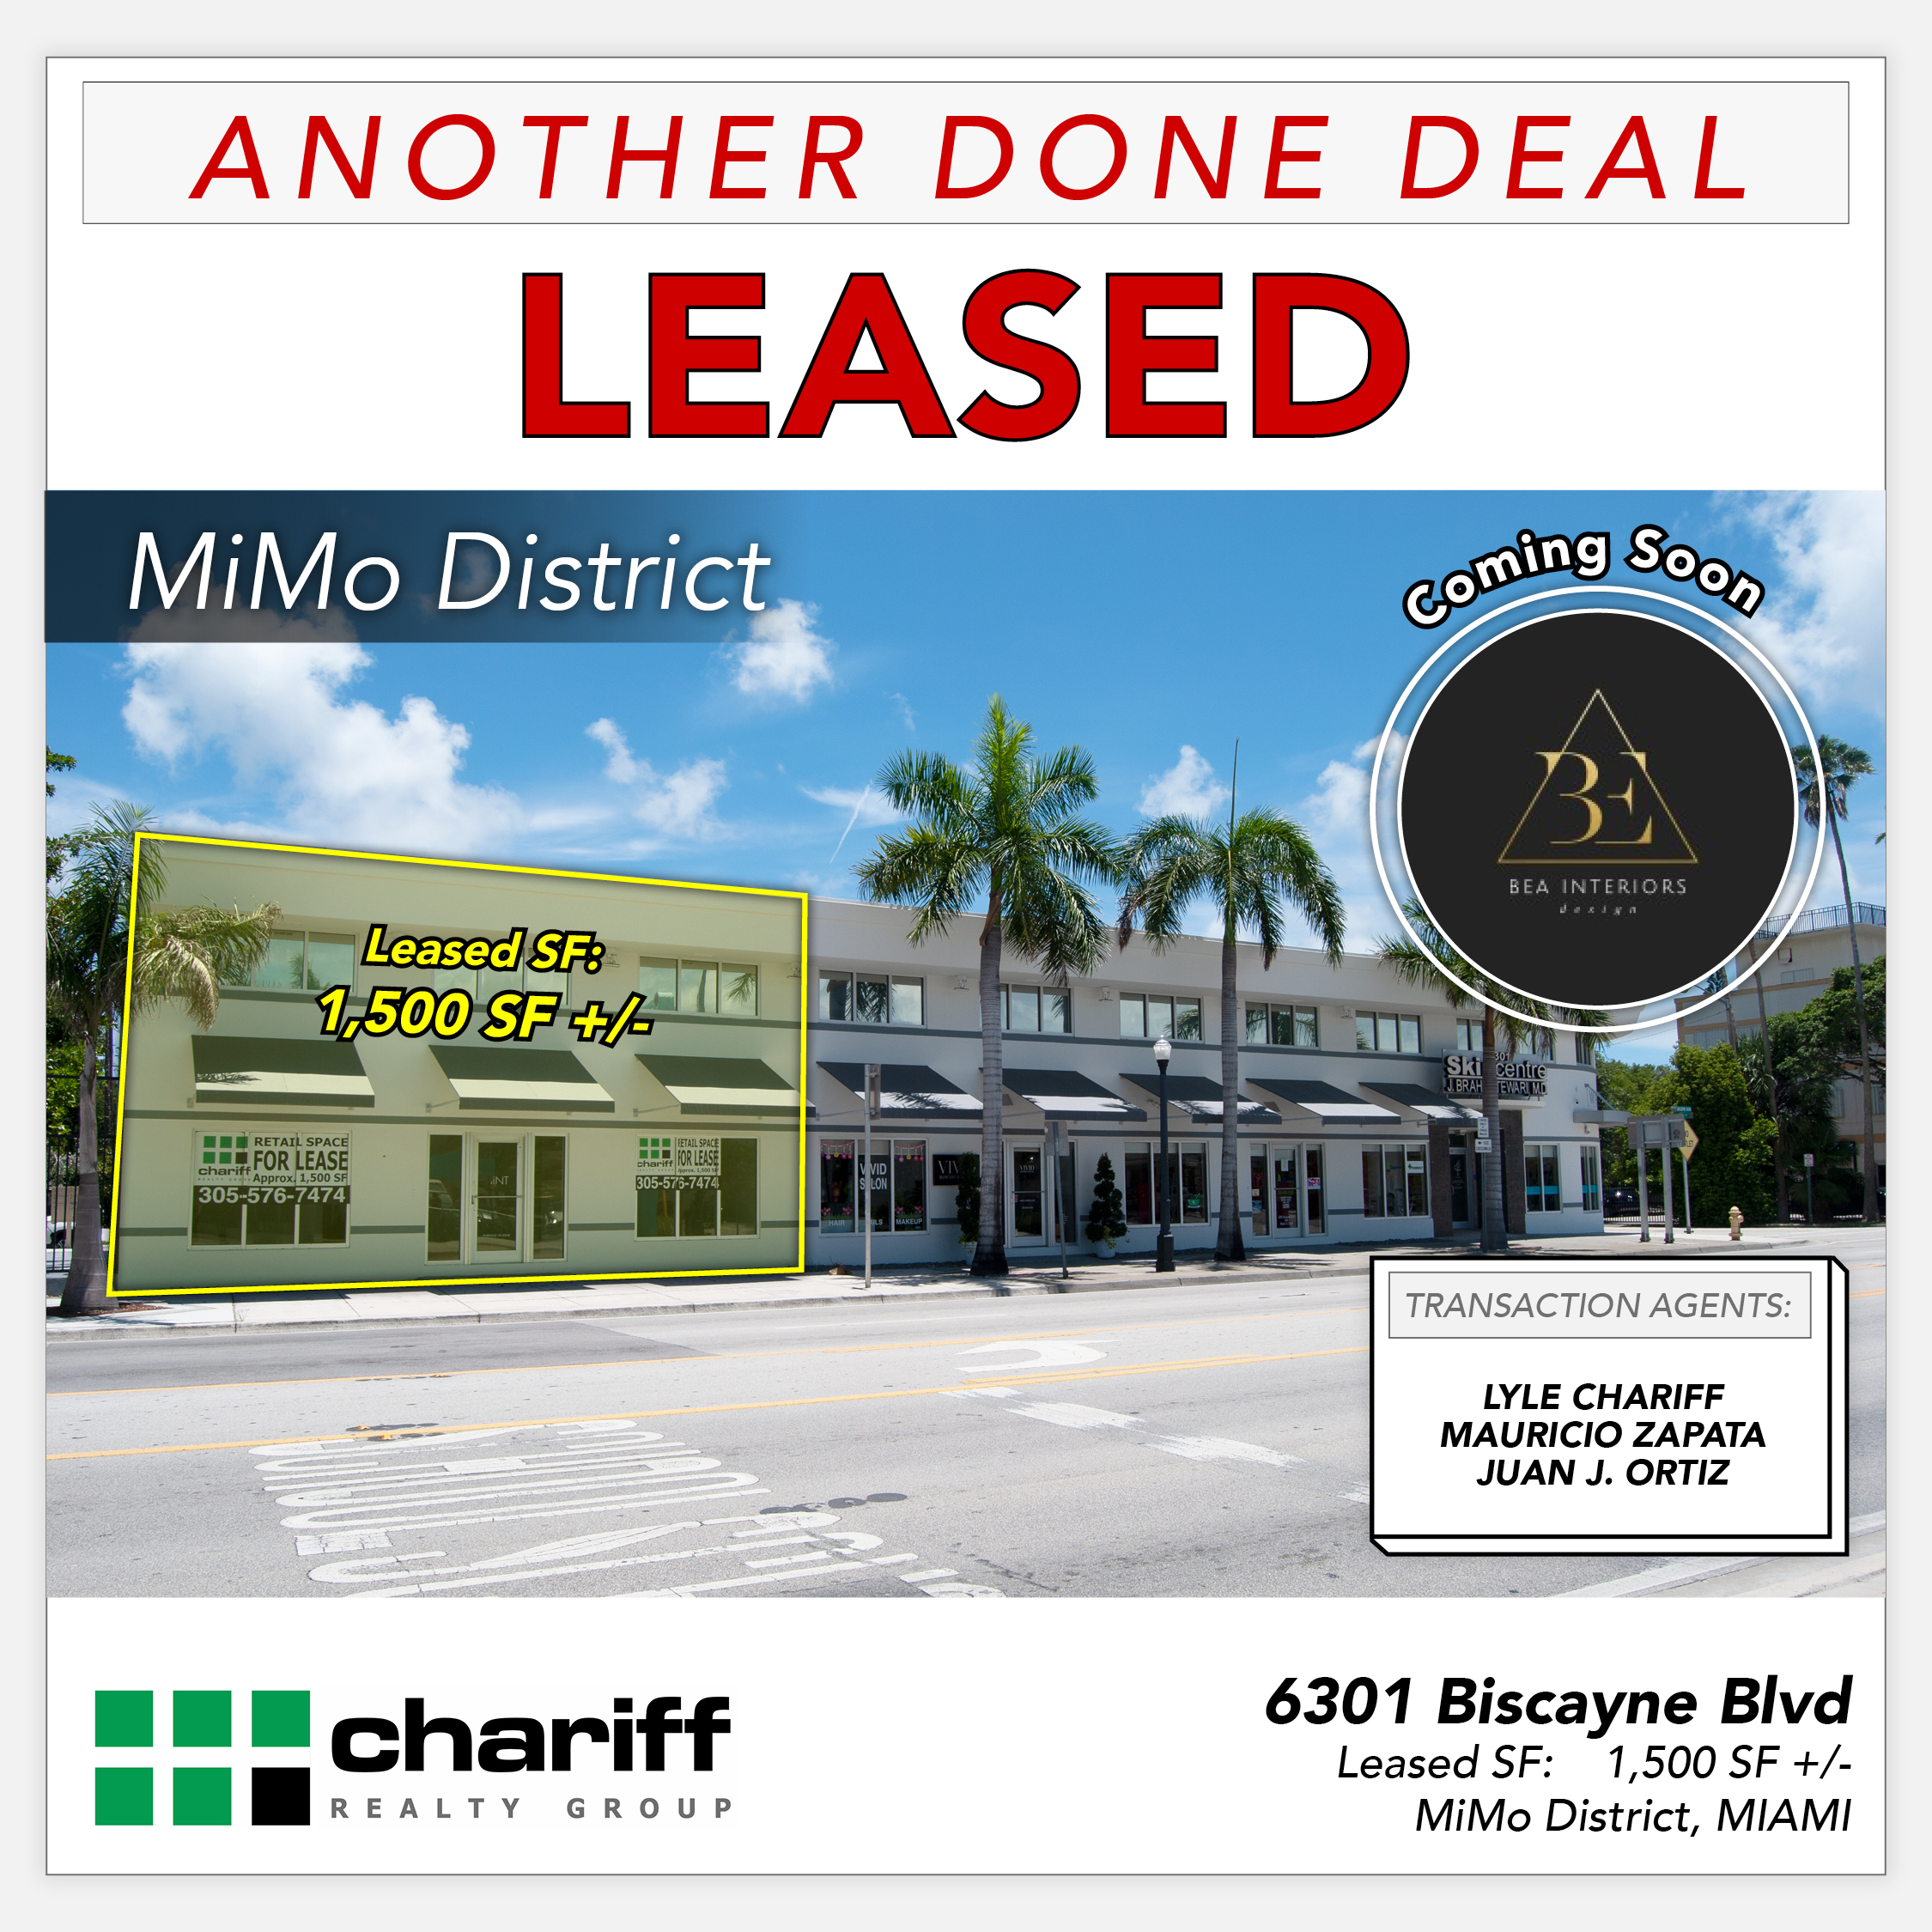 6301 Biscayne Blvd - Another Done Deal-Sold-MiMo District - Miami-Florida -33138 -Chariff Realty Group